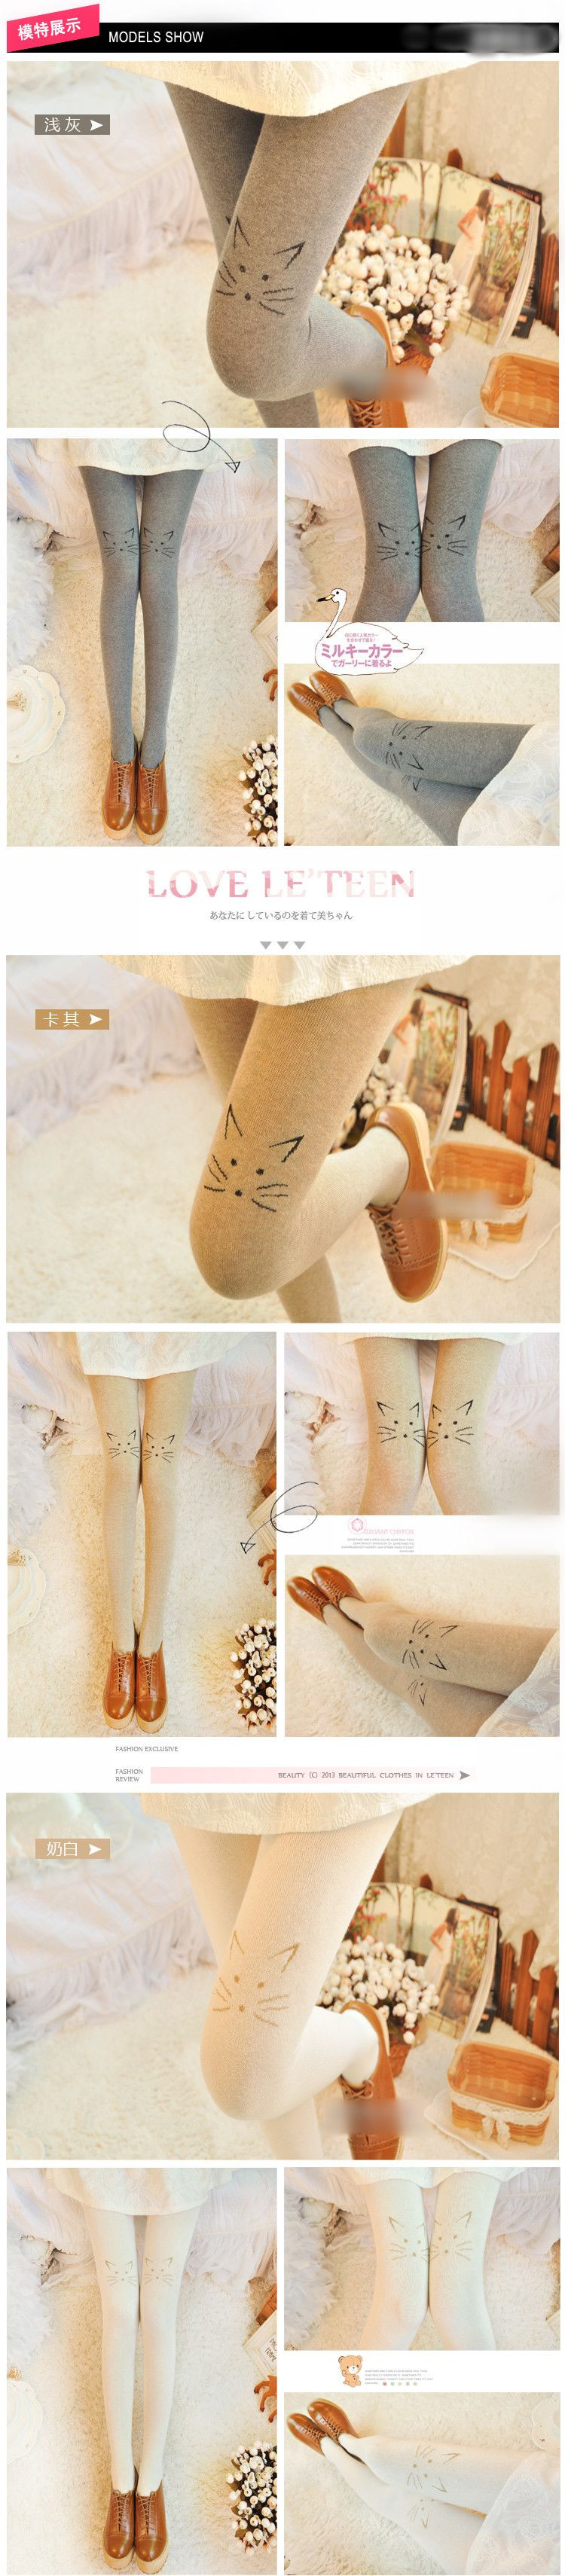 New Arrival Cotton Girls Print Cartoon Tights Japanese Filigree Embroidery Pantyhose Little Cat Stockings_4